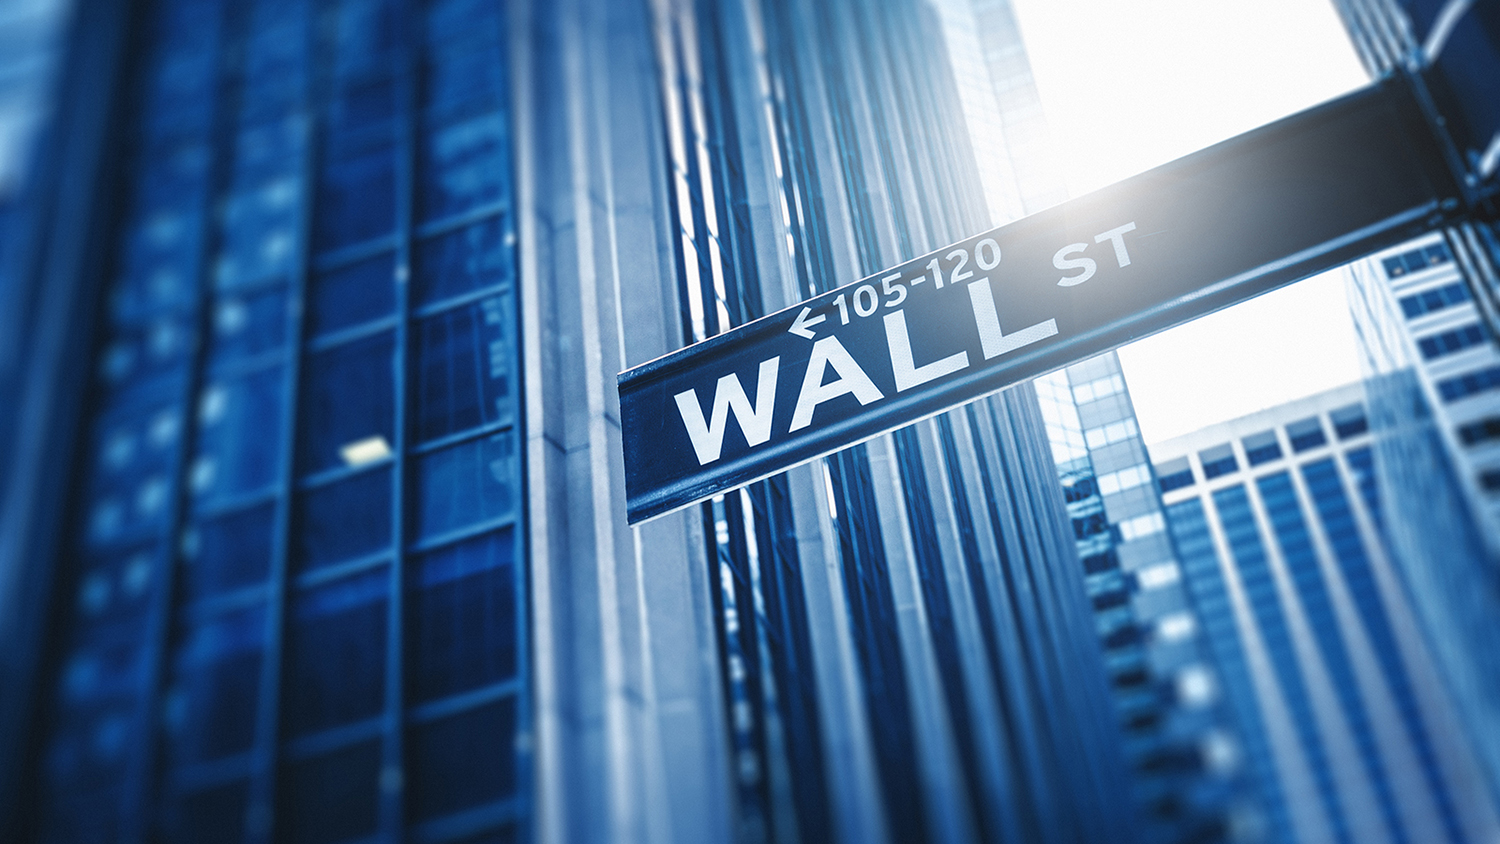 Stock image of a street sign for Wall Street in New York City.